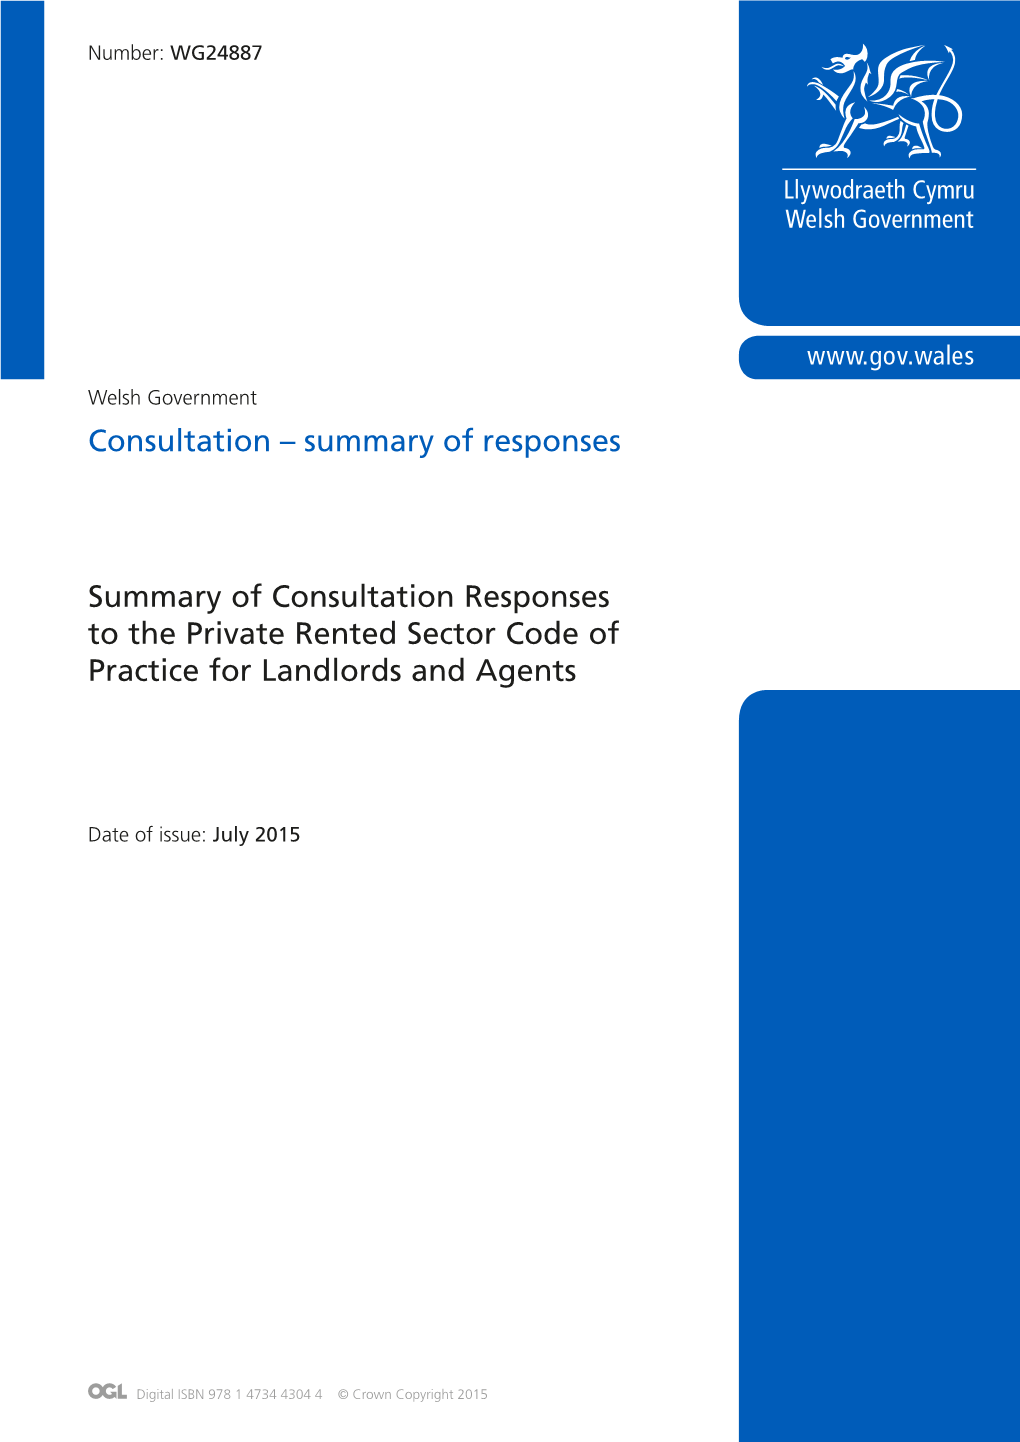 Summary of Consultation Responses to the Private Rented Sector Code of Practice for Landlords and Agents